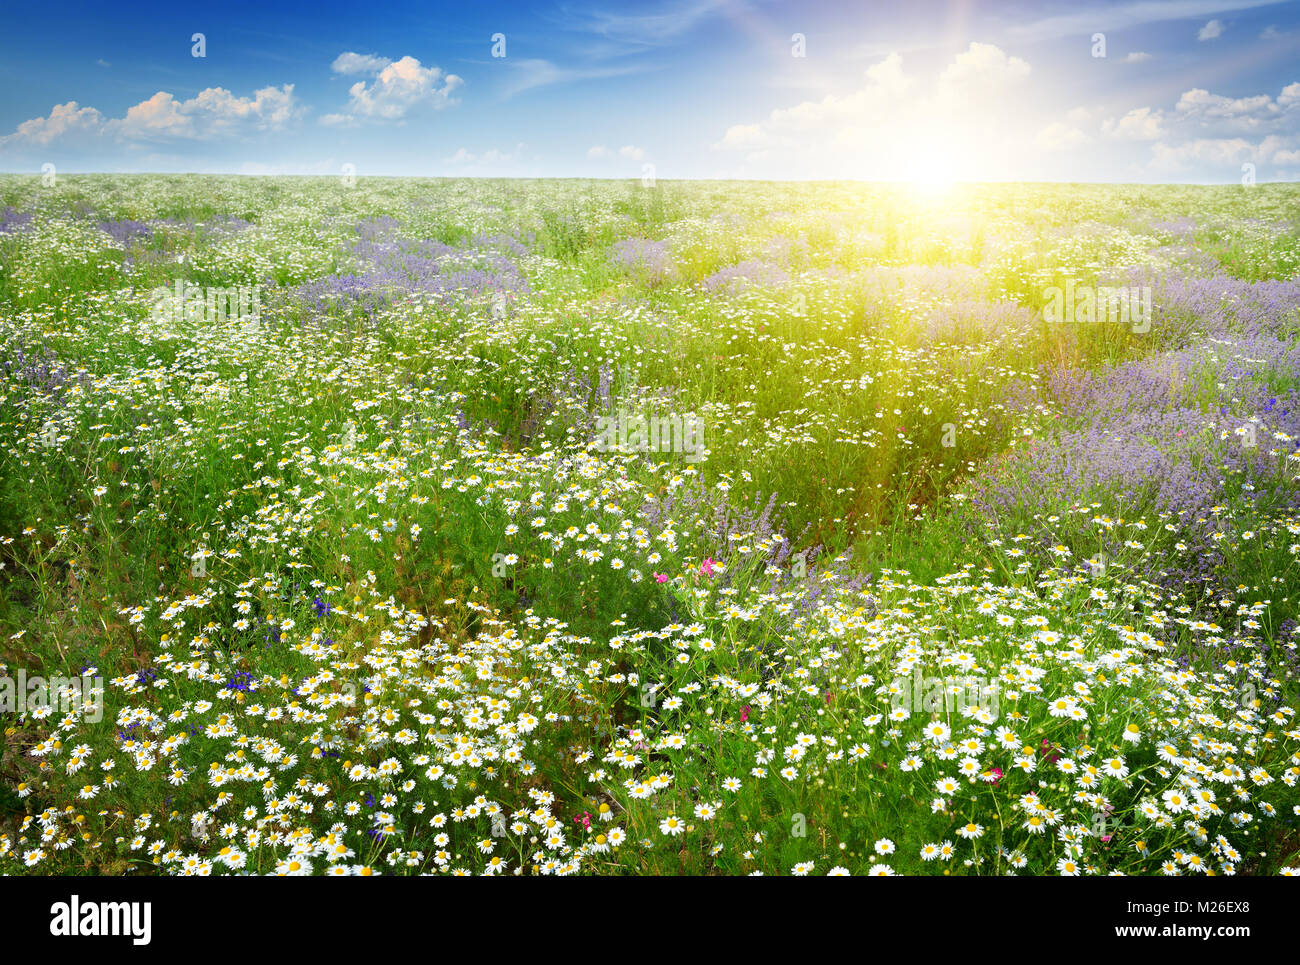 Dawn over the scenic summer field with chamomile flowers and lavender. Stock Photo